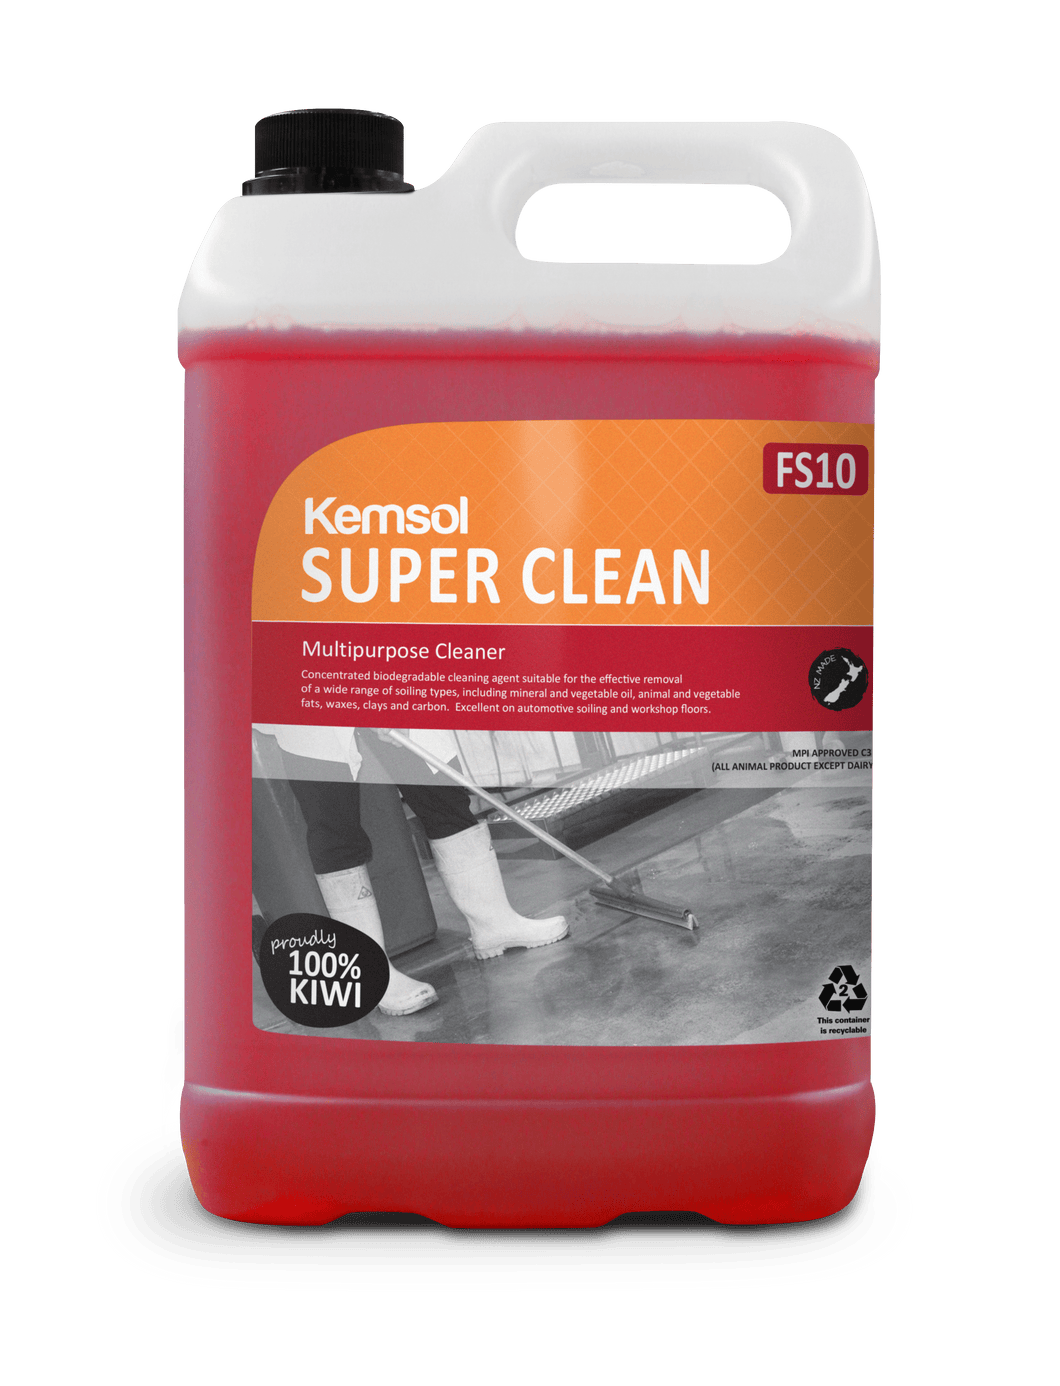 Super Clean Multipurpose Cleaner Kemsol - Select Your Size